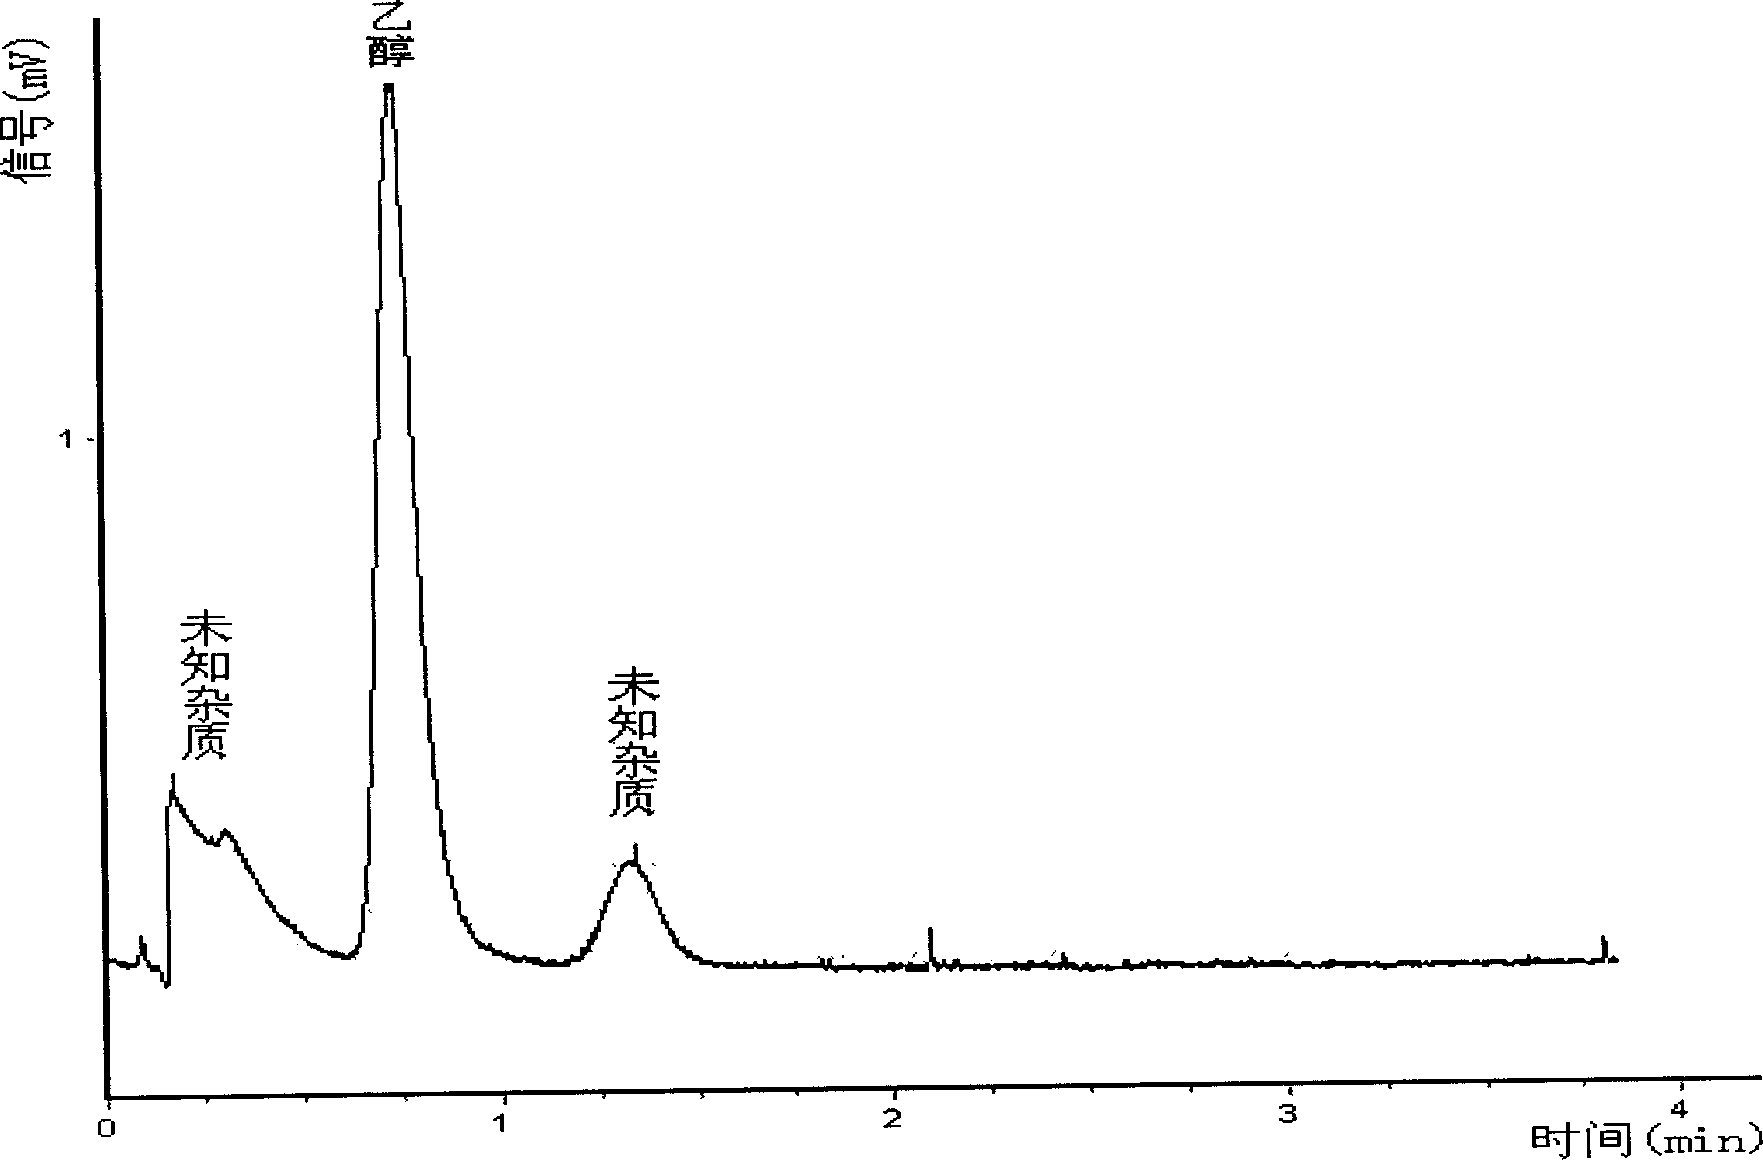 Gas phase chromatography analysis method for micro ethanol in human blood